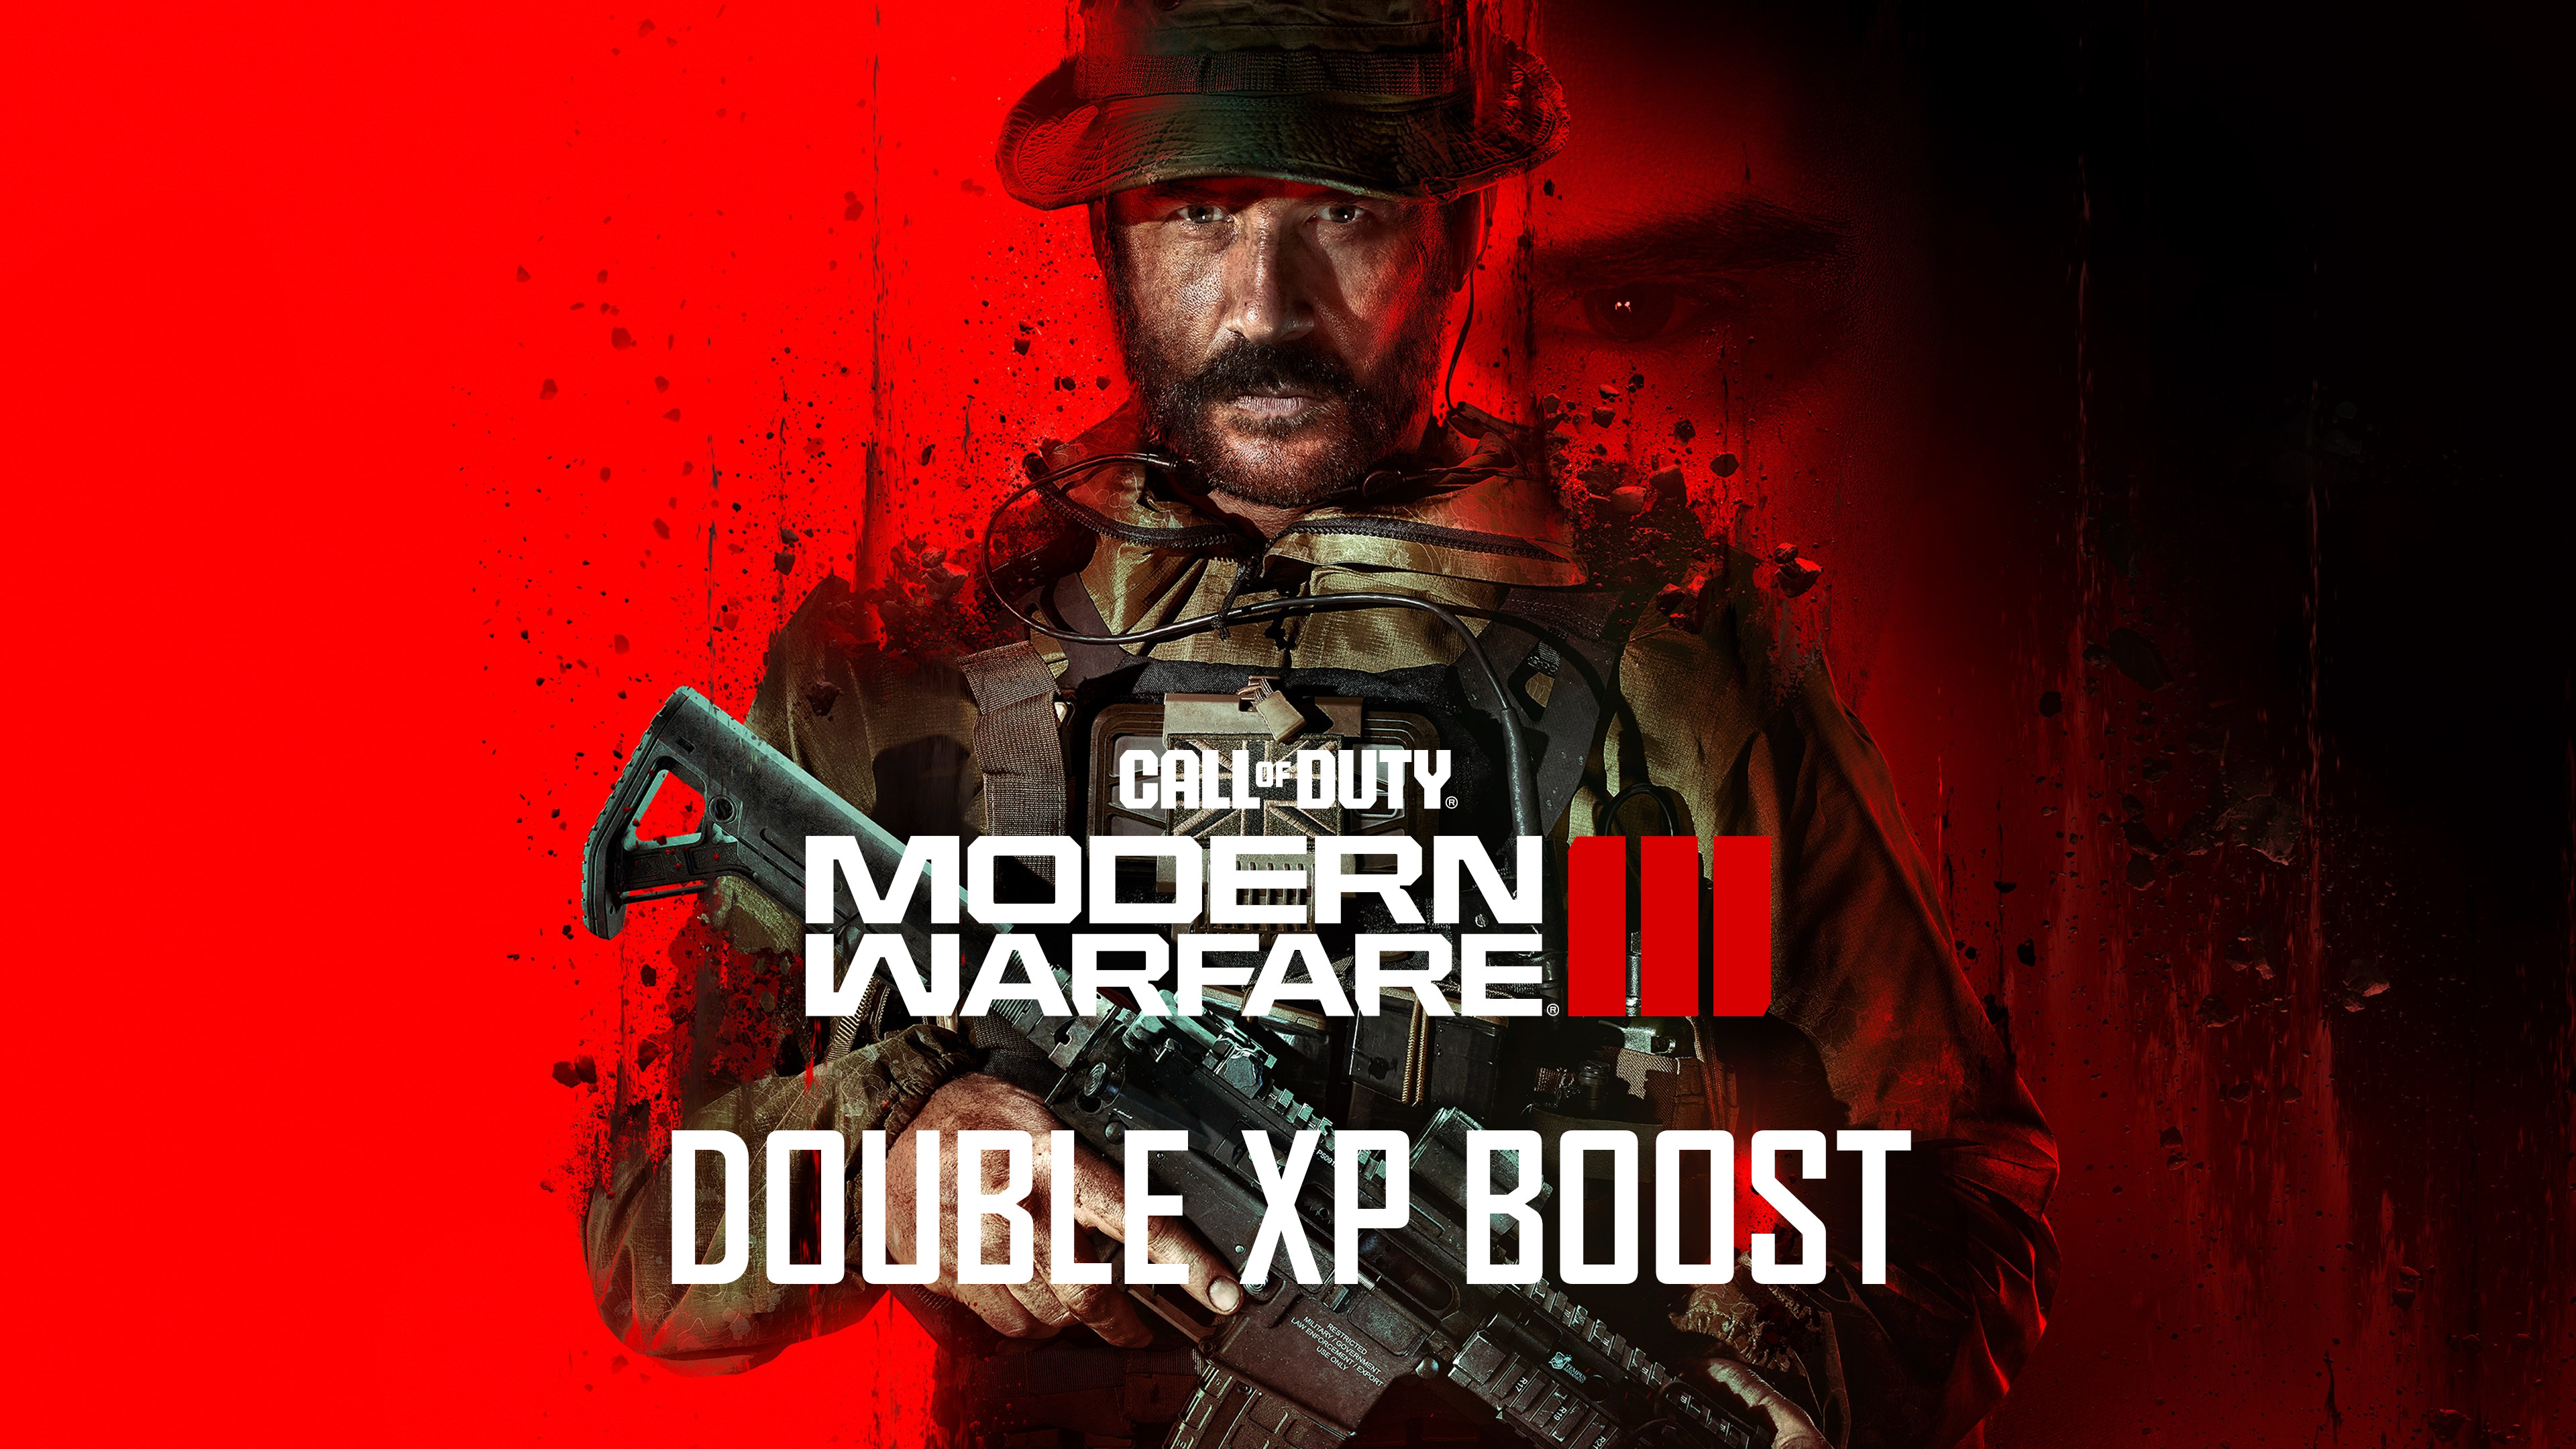 Call of Duty: Modern Warfare III - 5 Hours Double XP Boost PC/PS4/PS5/XBOX One/Series X|S CD Key, $4.52